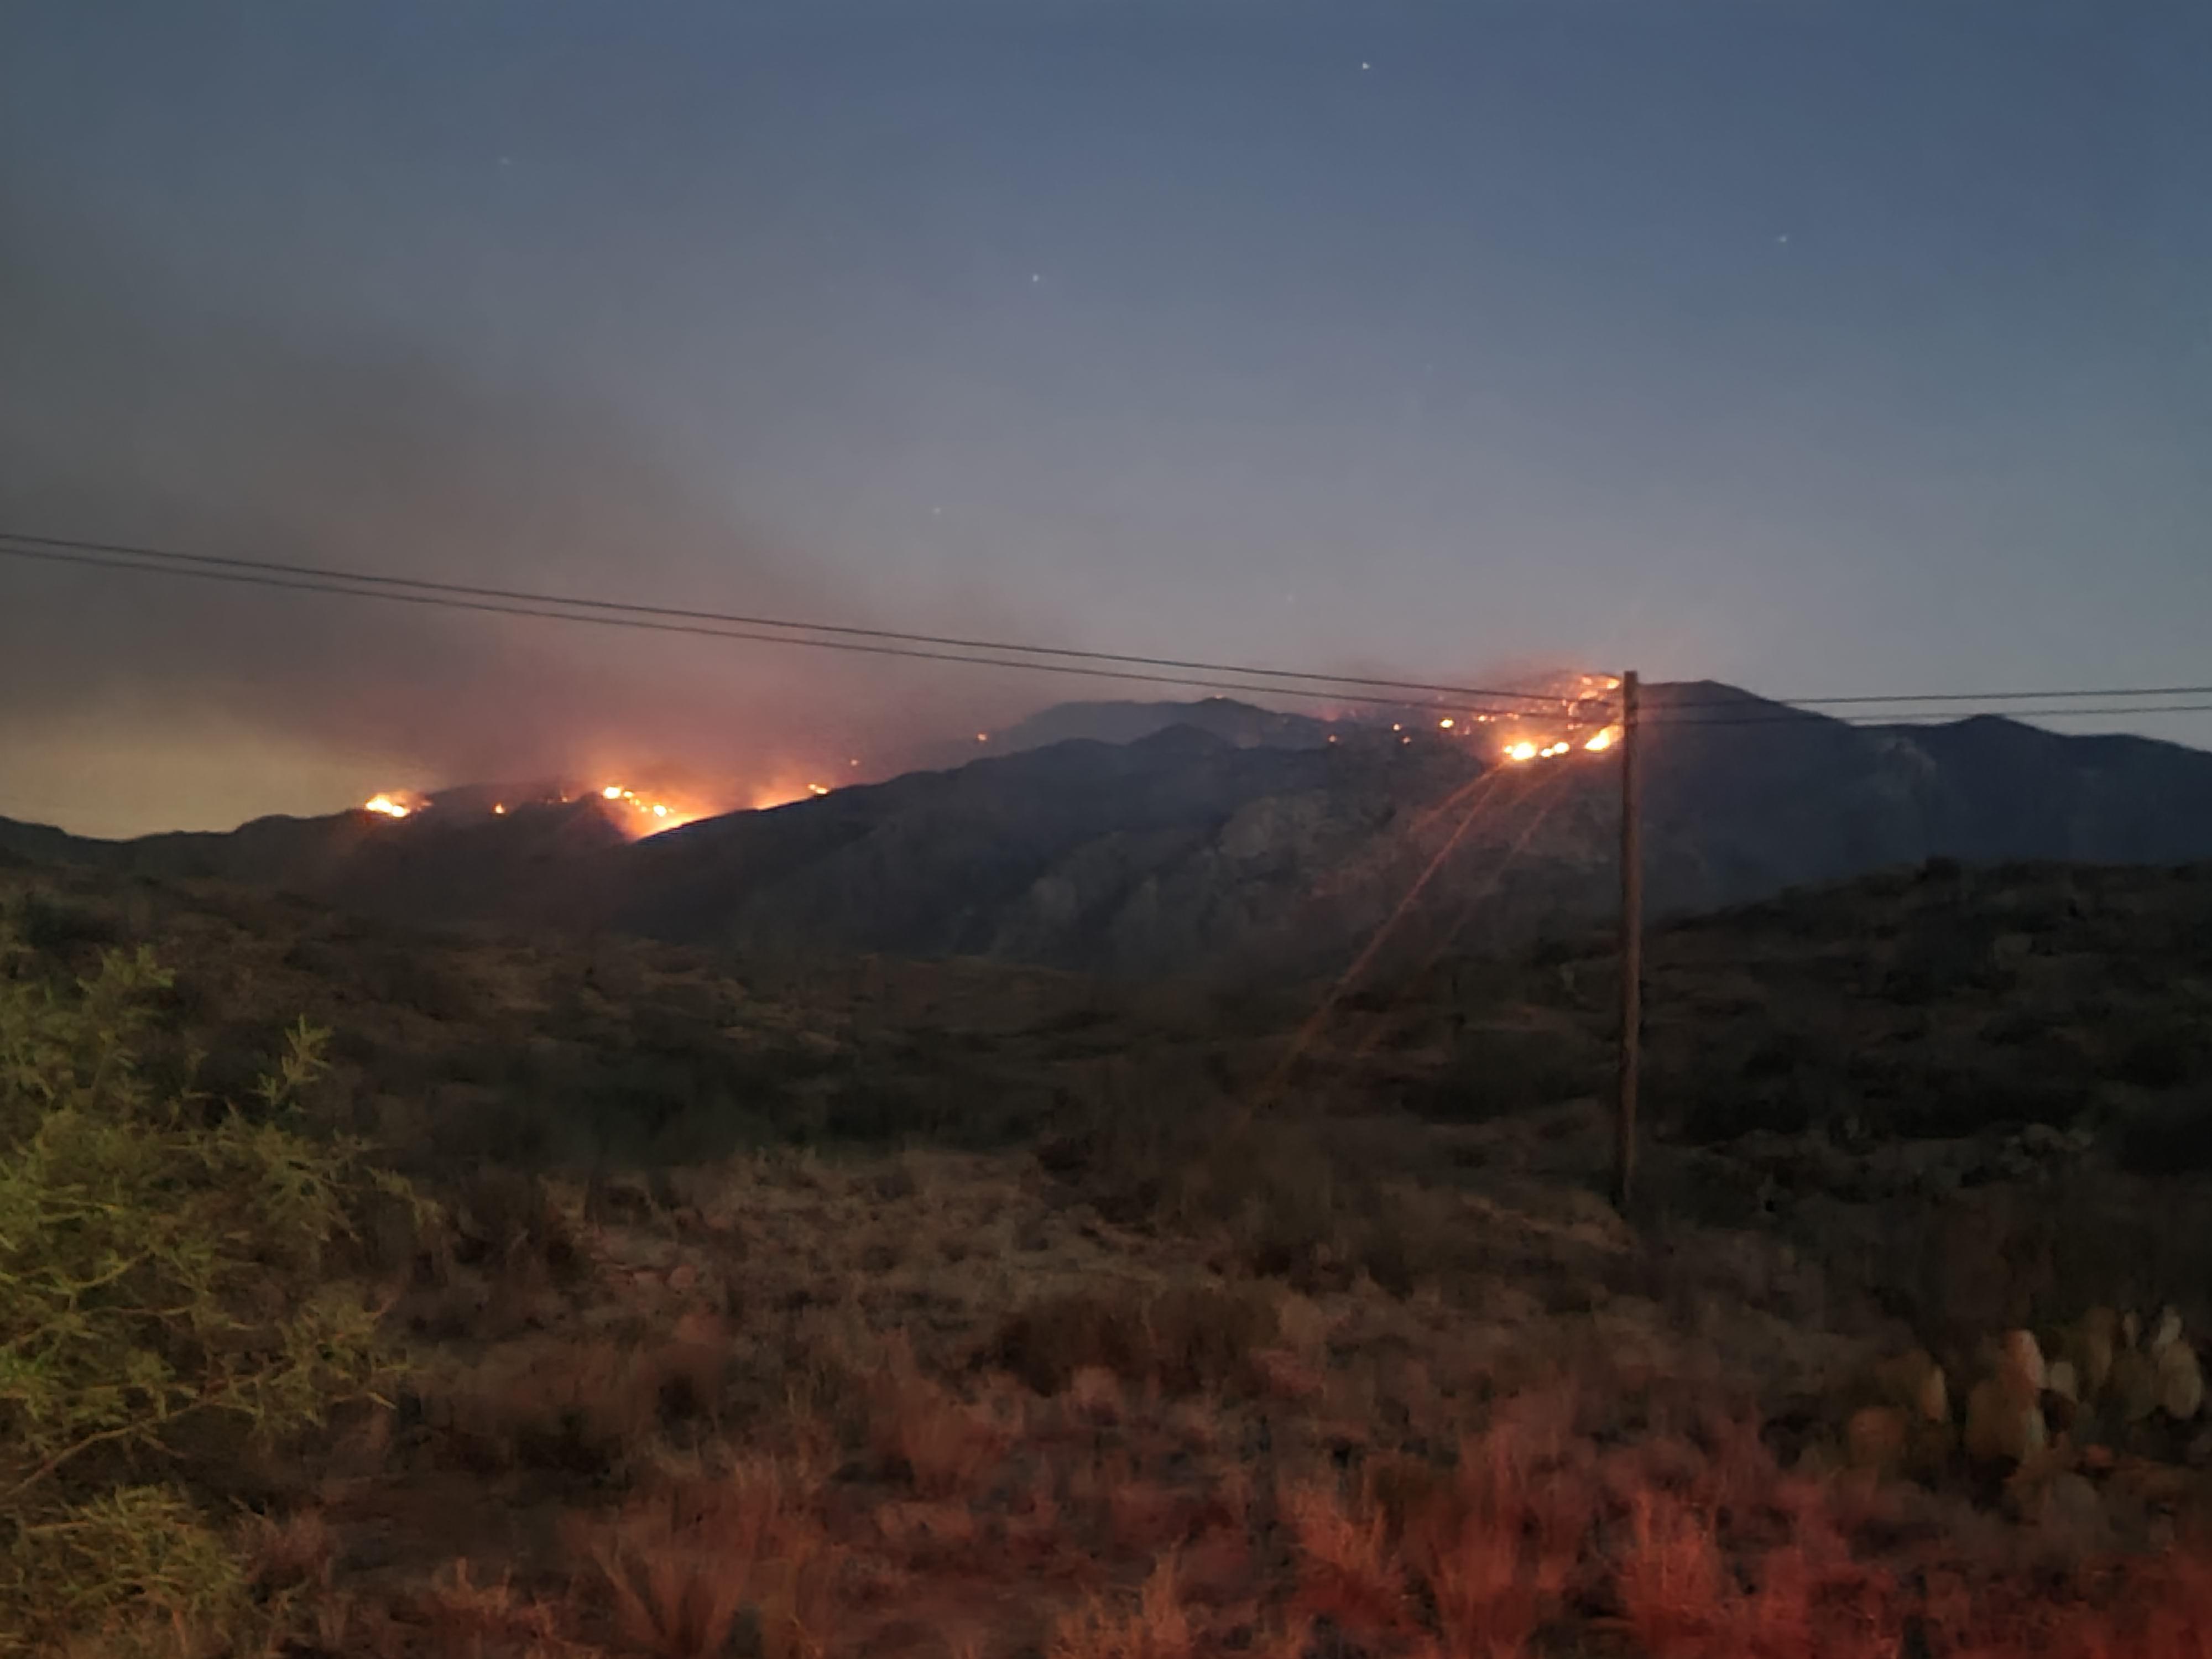 Night time July 7 Fire visible in night sky on top of mountain